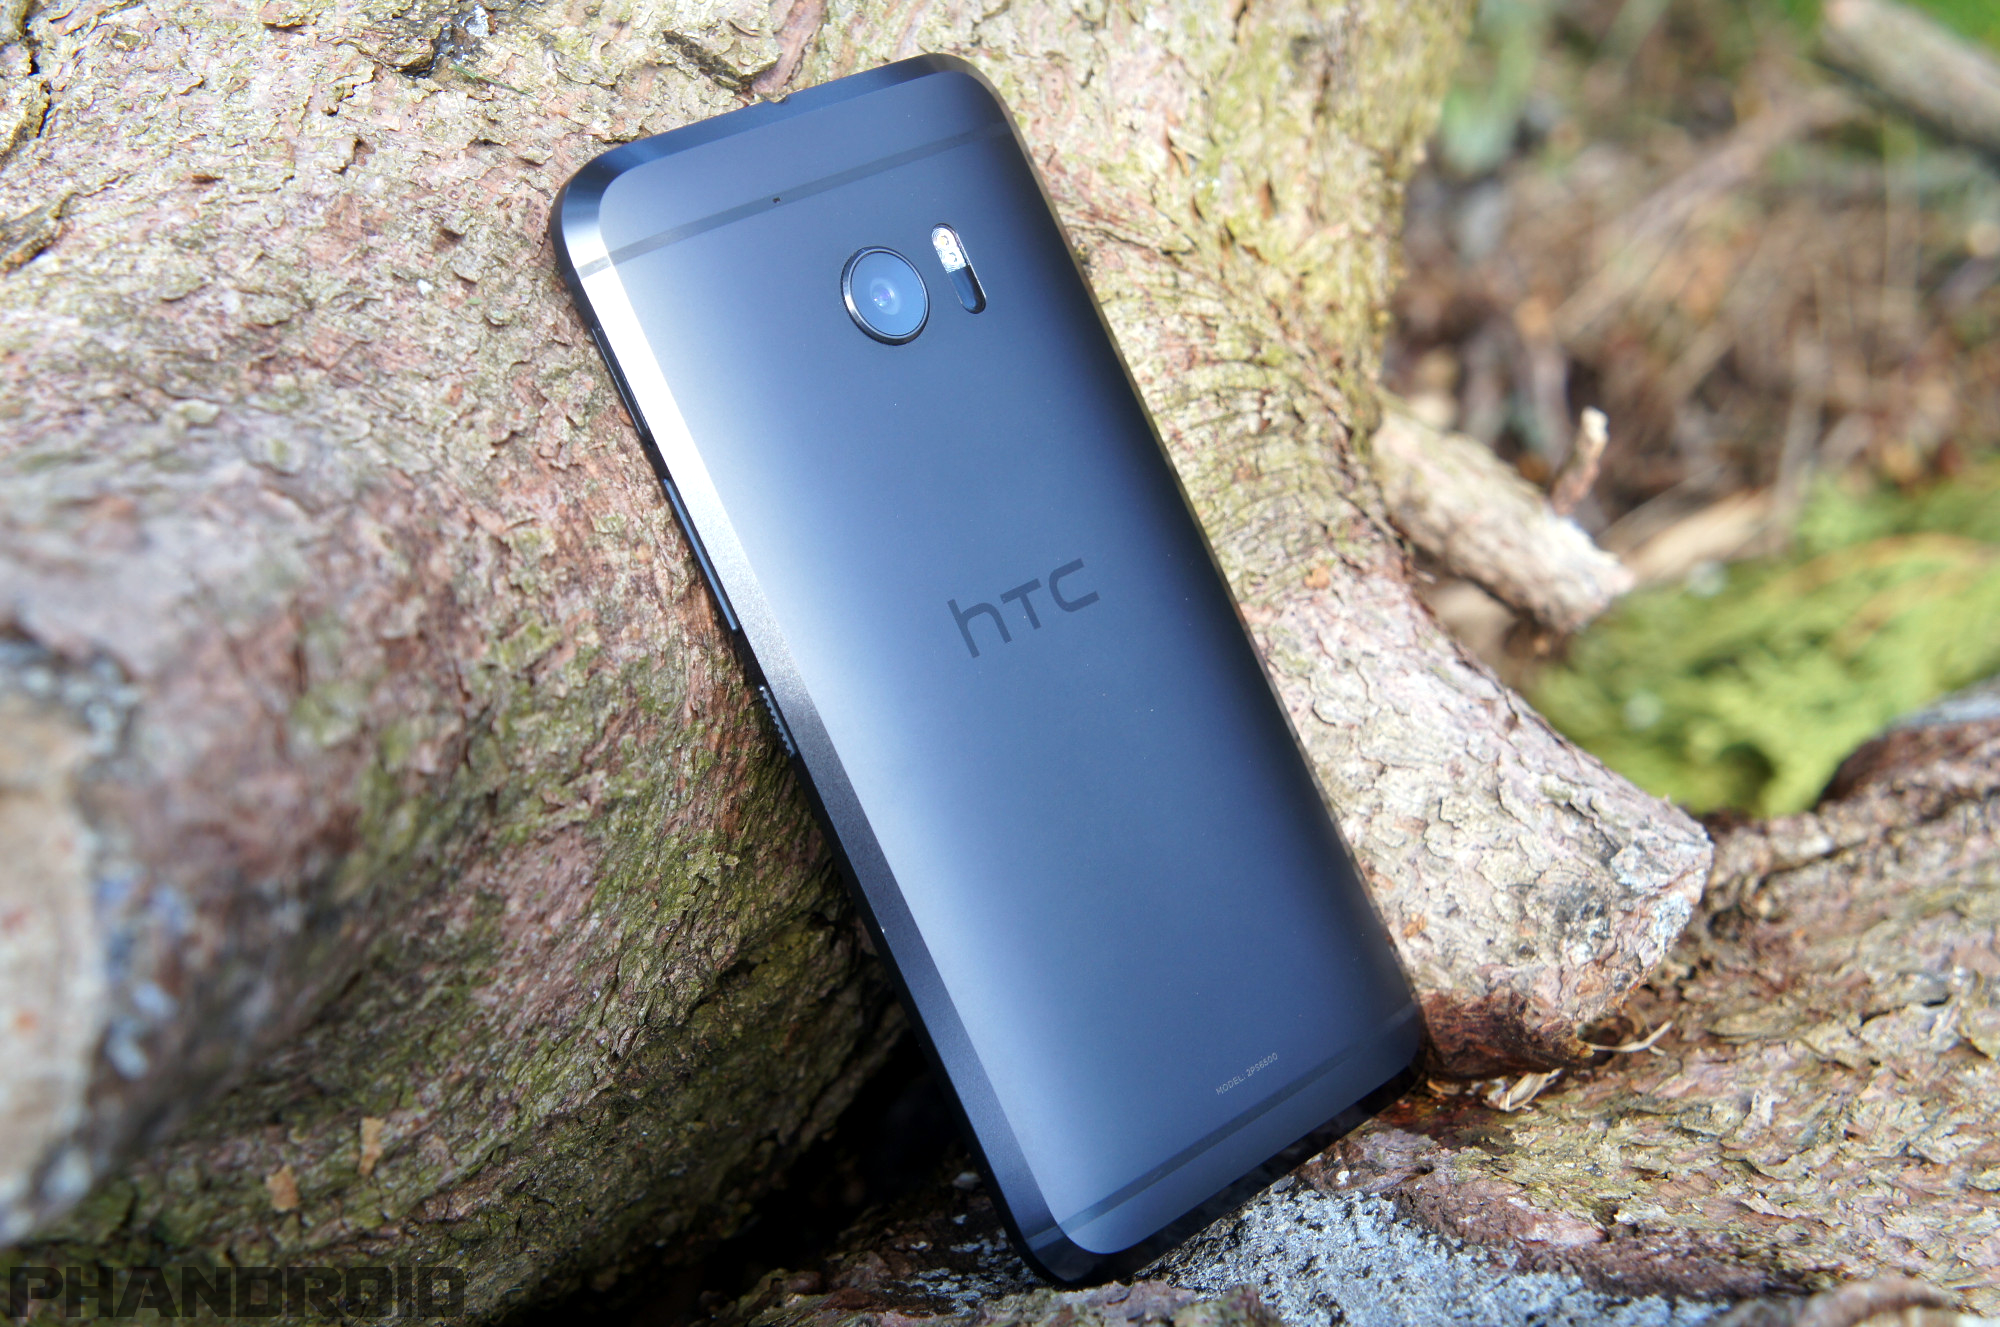 Armstrong defect Slechthorend HTC 10 Review – Phandroid